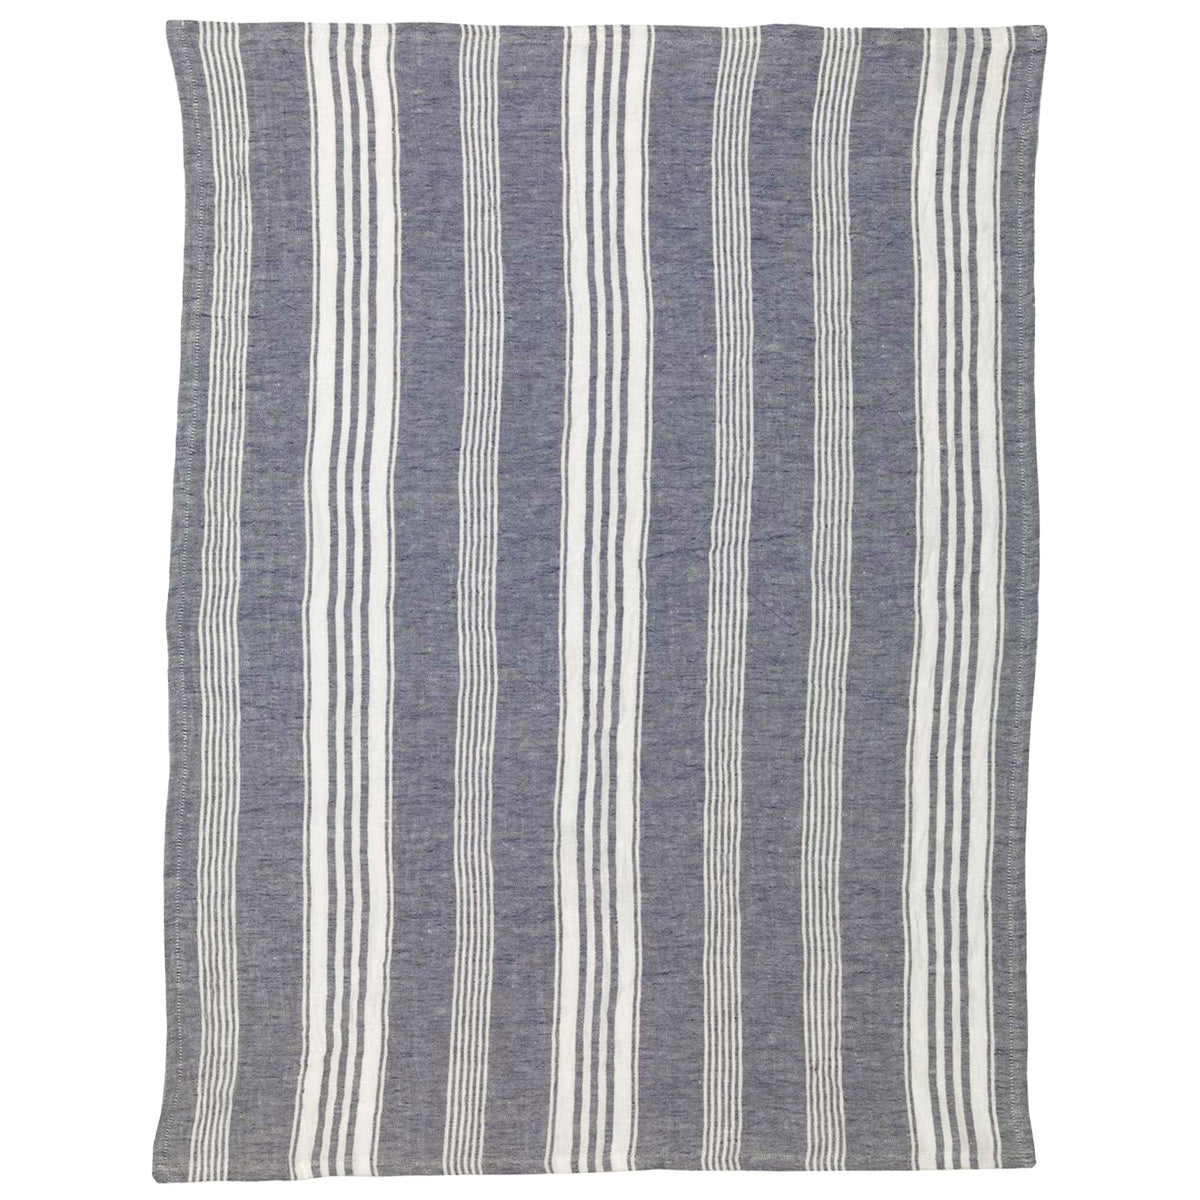 Trattoria Blue Kitchen Towel Multi Stripes sold as part of a mixed set of 2 in Italian Linen from Caskata